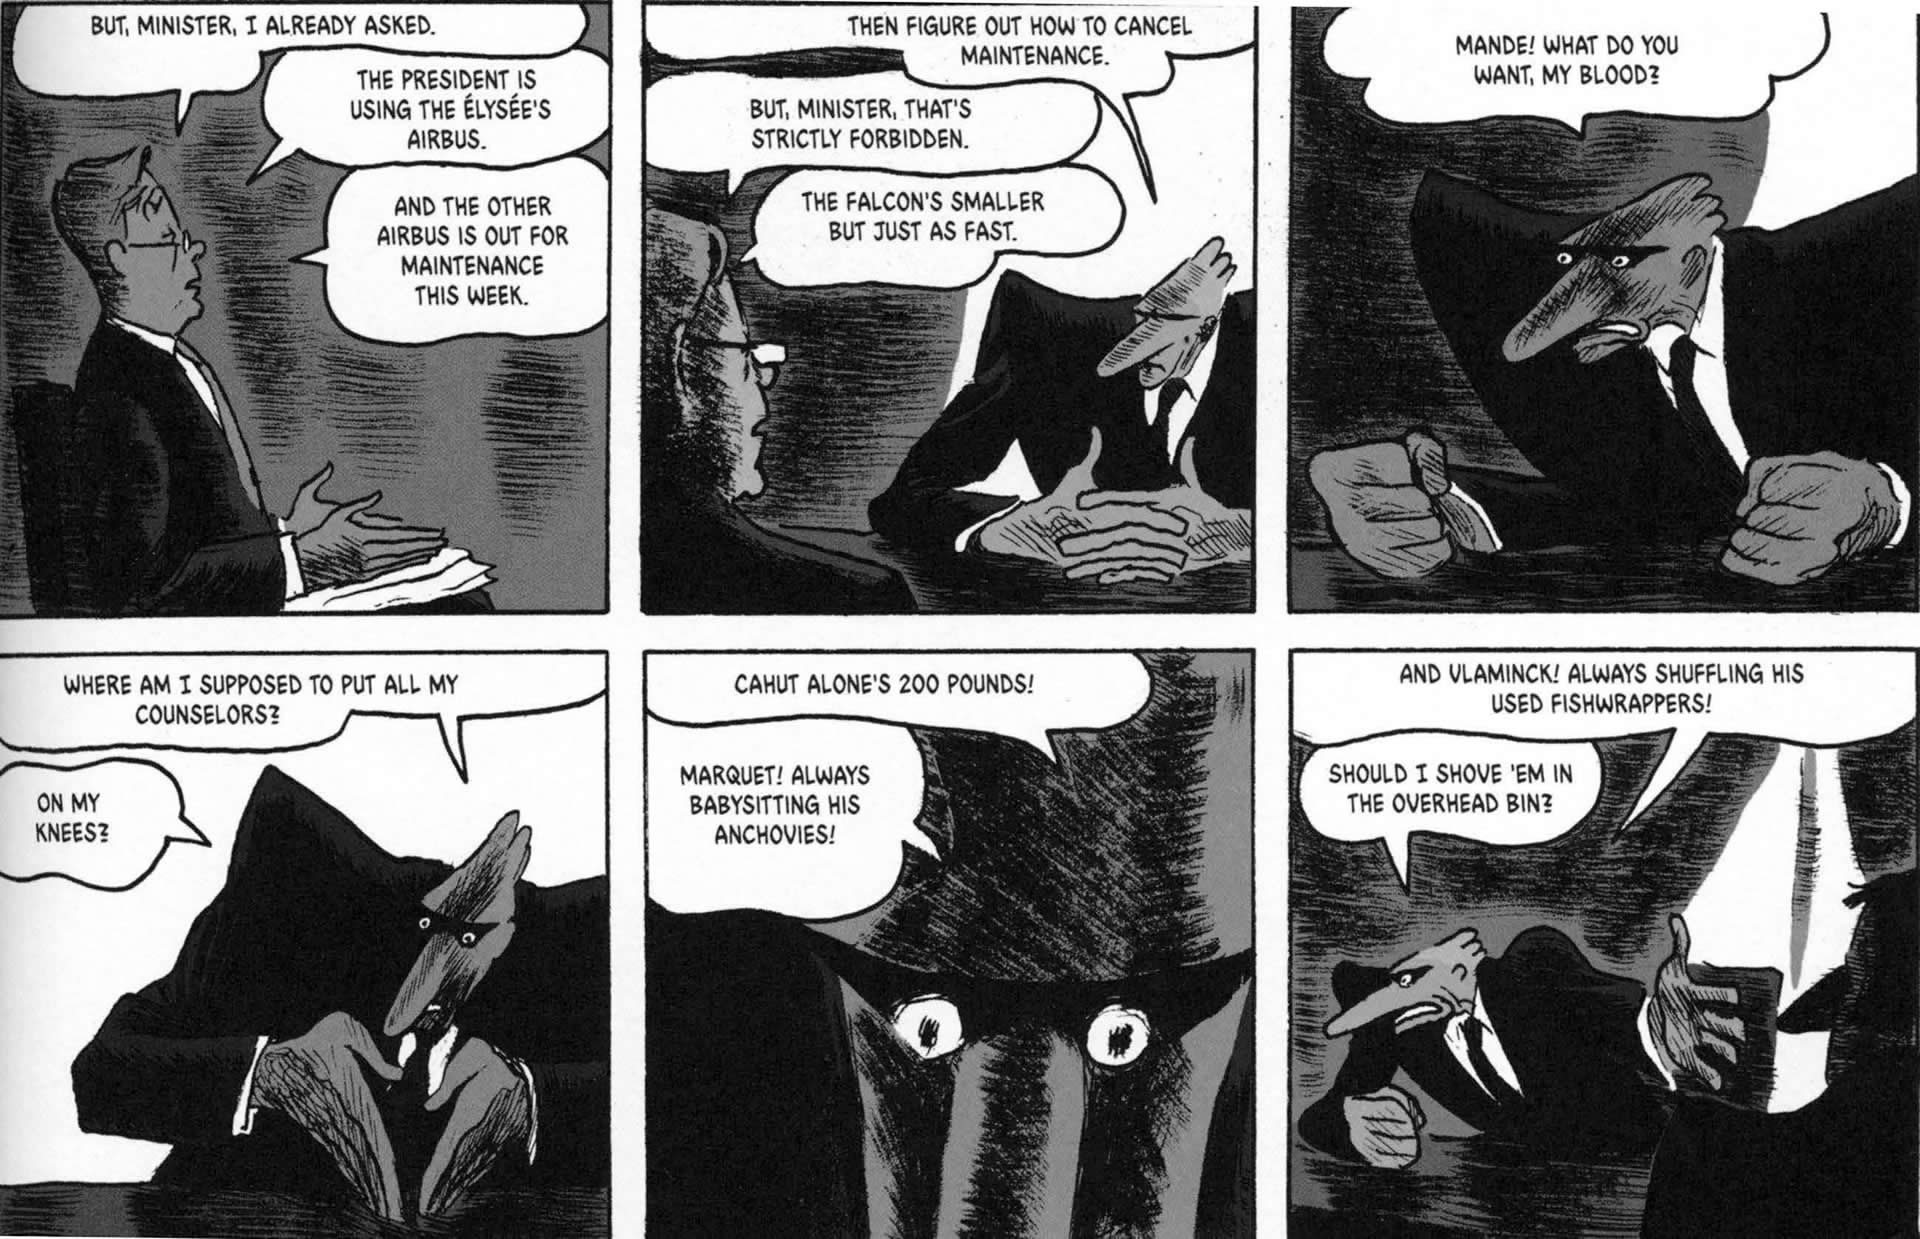 Dialogue in Comics: Medium-Specific Features and Basic Narrative Functions  — by Kai Mikkonen | INVERSE JOURNAL